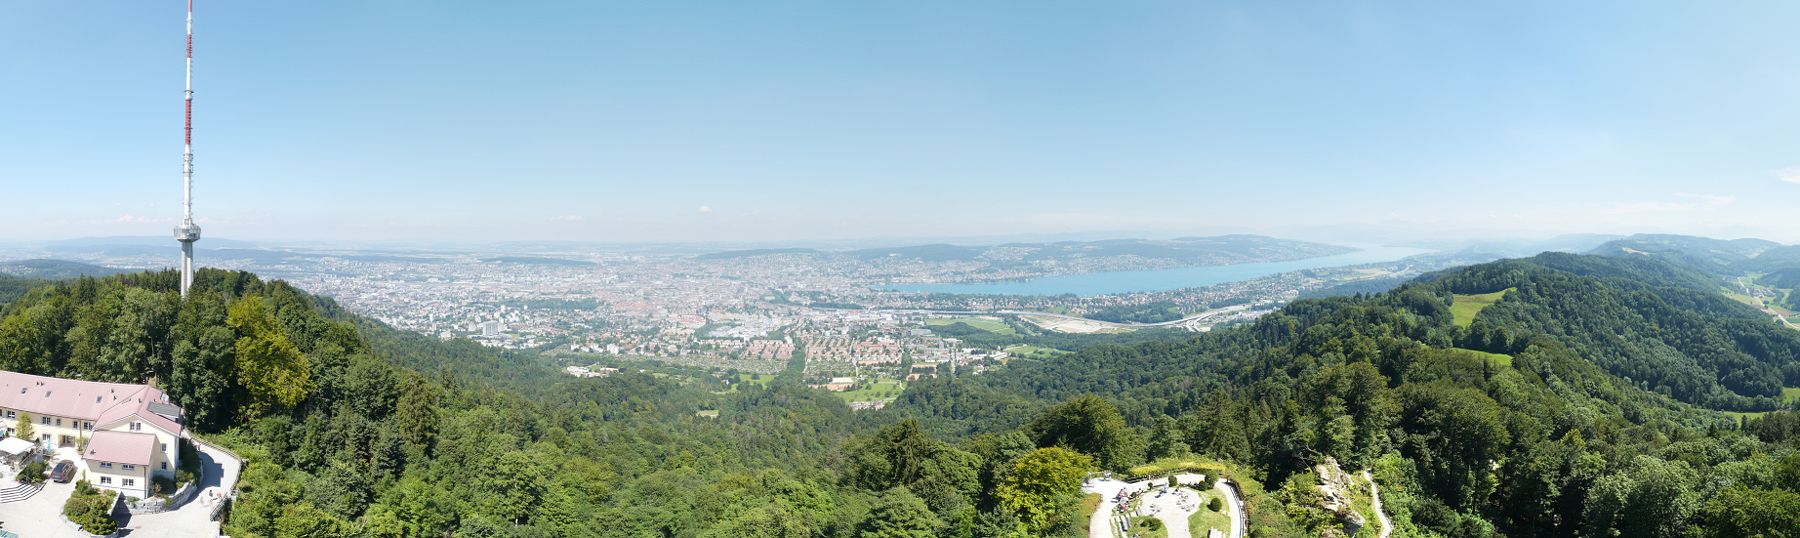 The view of Zürich from the Uetliberg.